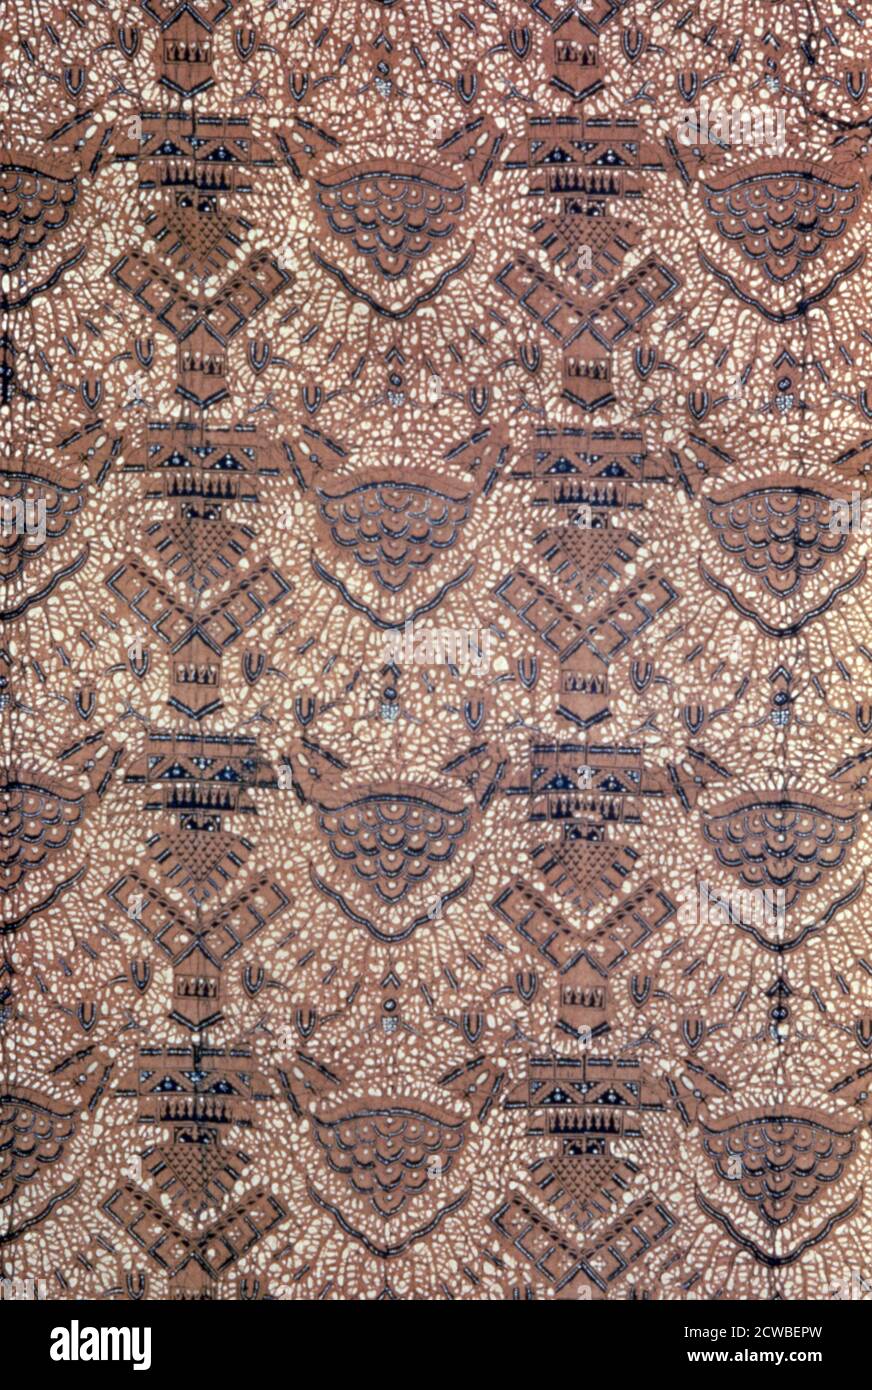 Wallpaper designed by William Morris. Morris (1834-1896) was a member of the Pre-Raphaelite Brotherhood and one of the principal founders of the Arts and Crafts Movement. Stock Photo